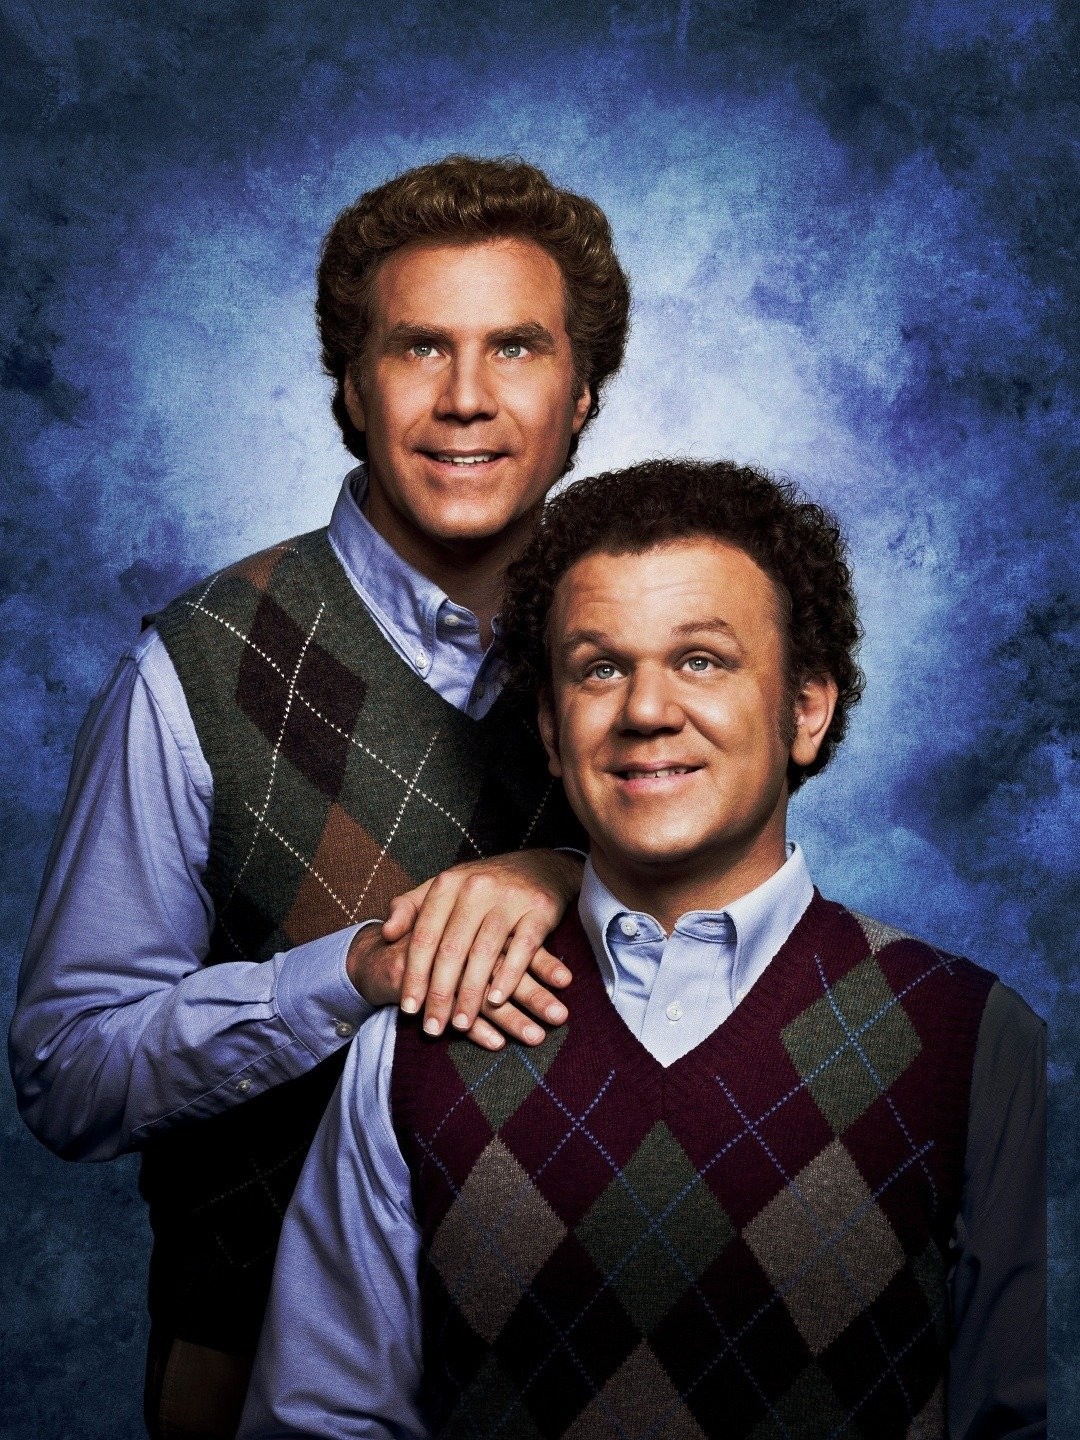 Step Brothers  Rotten Tomatoes